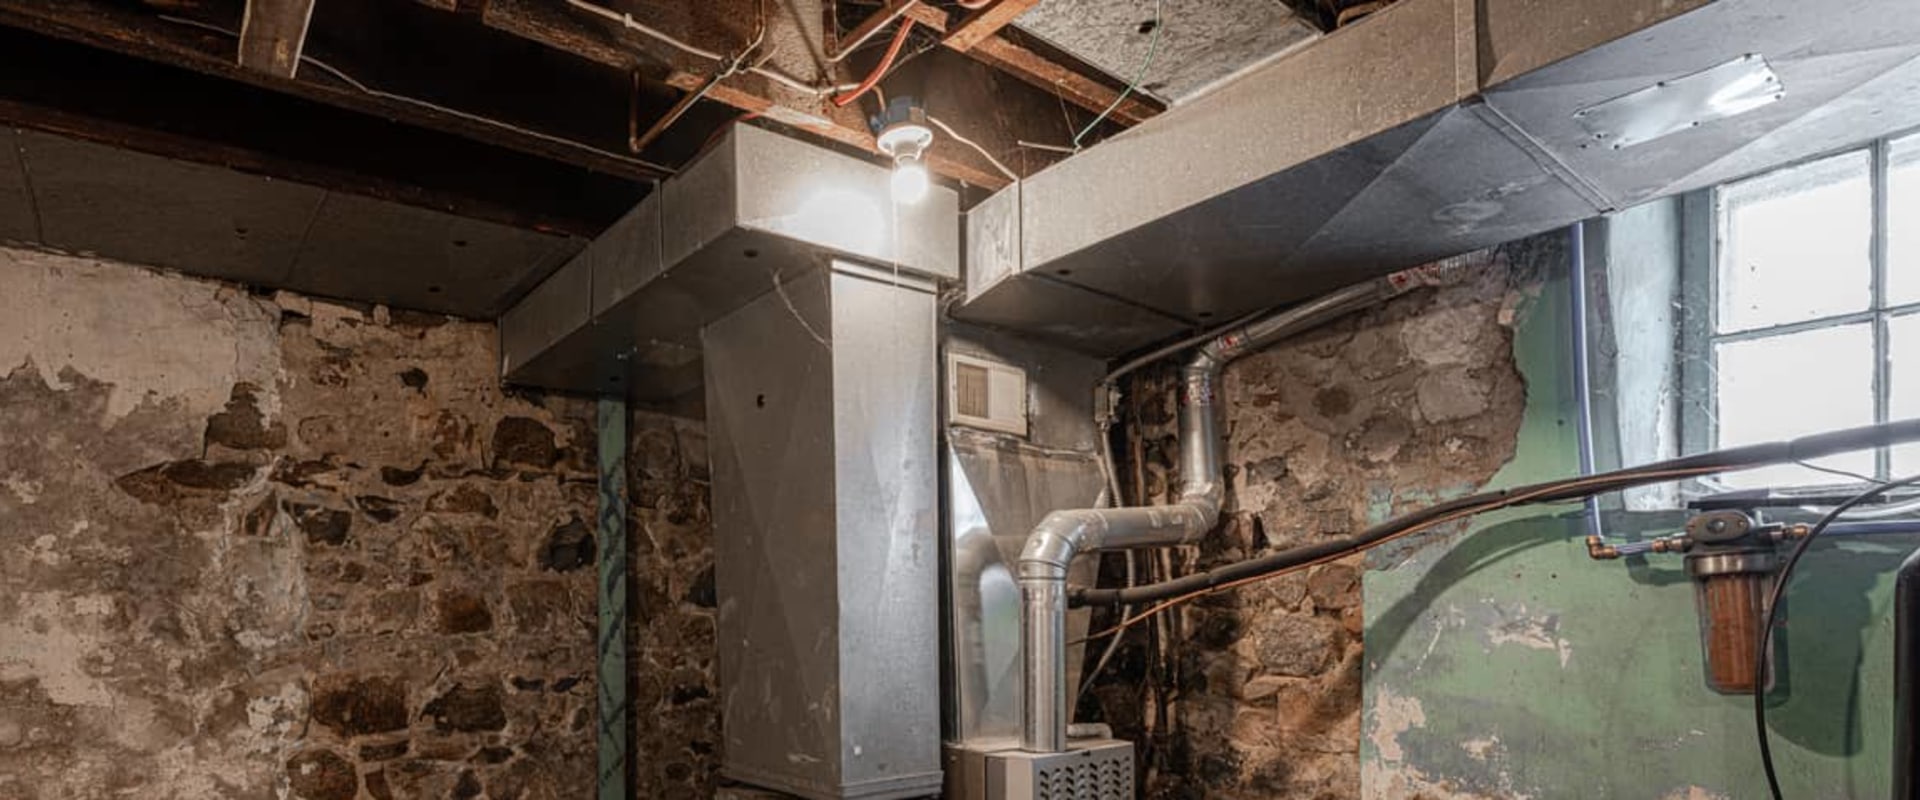 How Long Does It Take to Install a Furnace? - A Comprehensive Guide